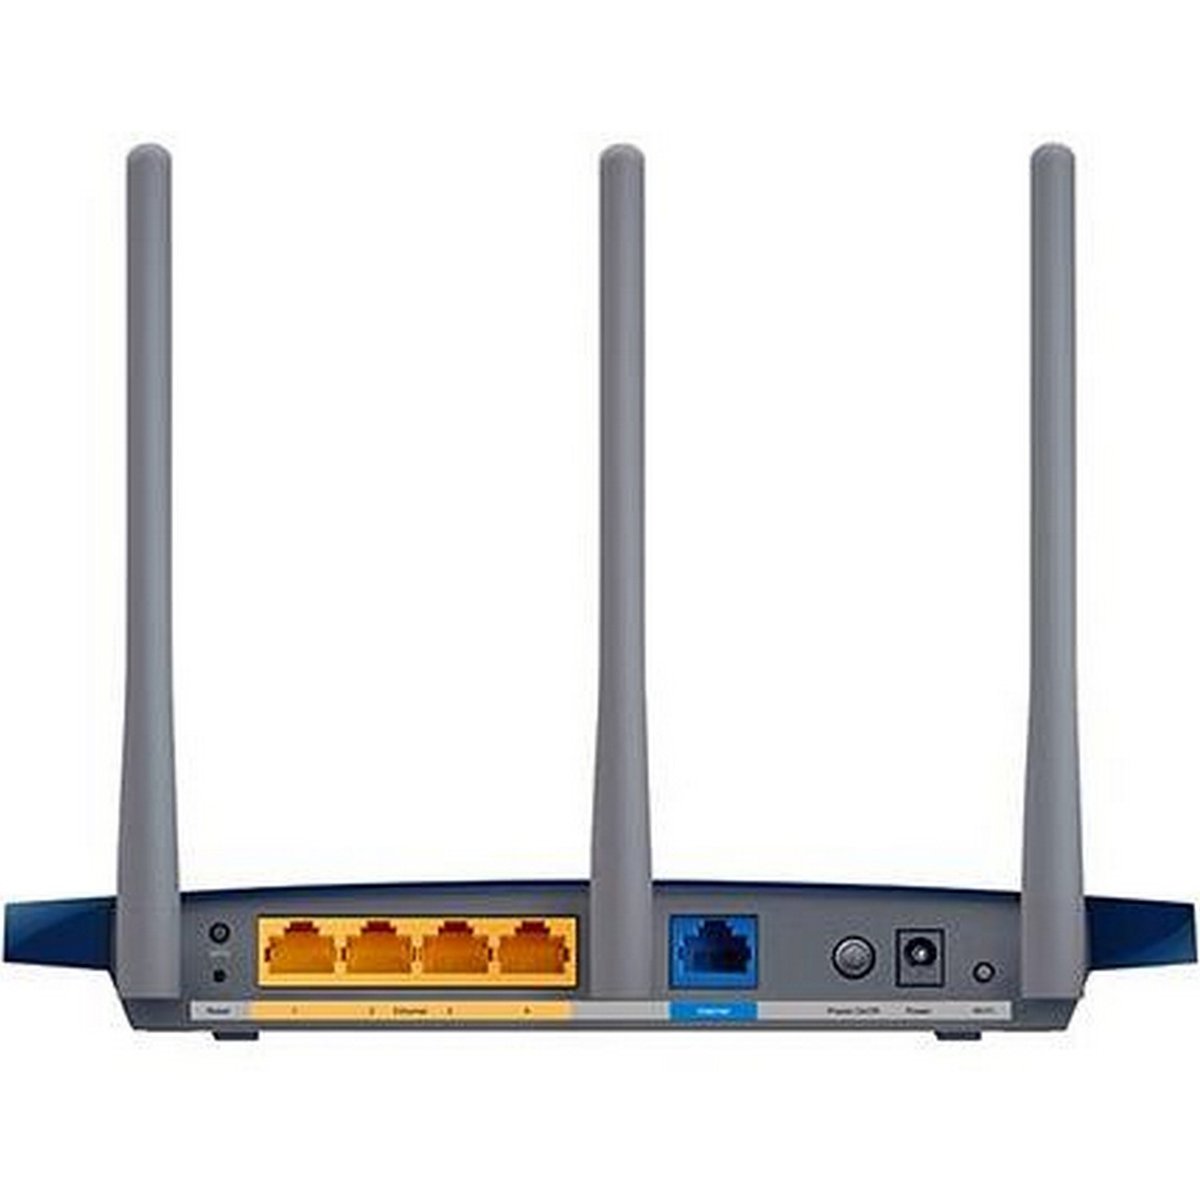 TPLink AC1350 Wireless Dual Band Router Archer C58